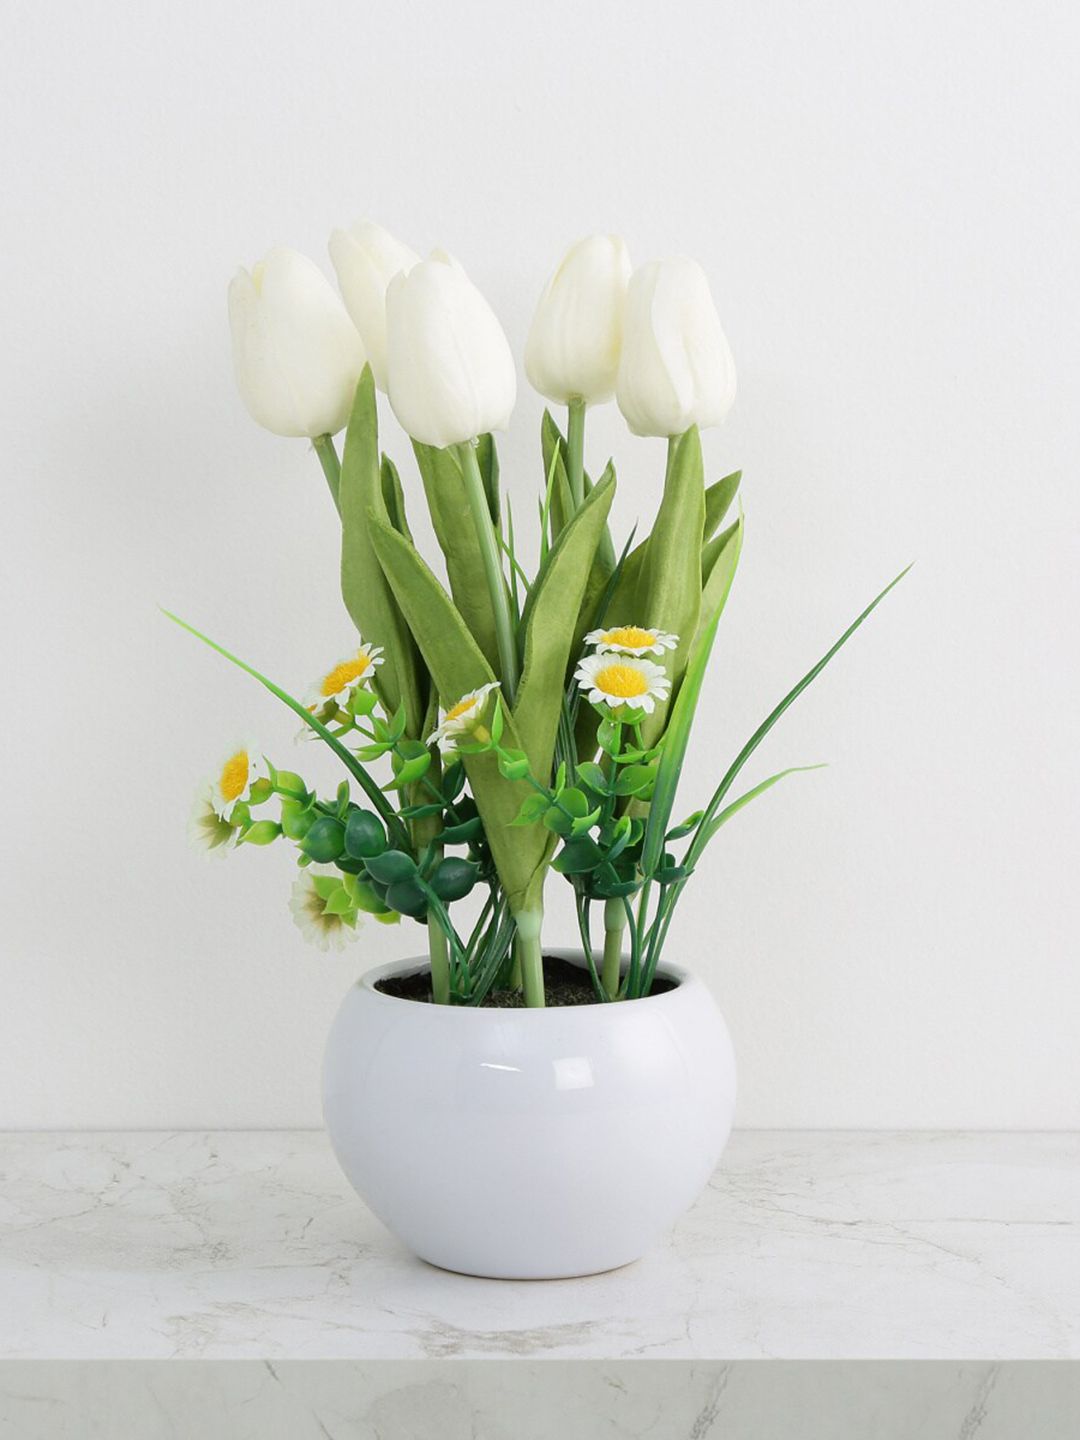 Home Centre White Gardenia Artificial Flowers With Plastic Pot Price in India